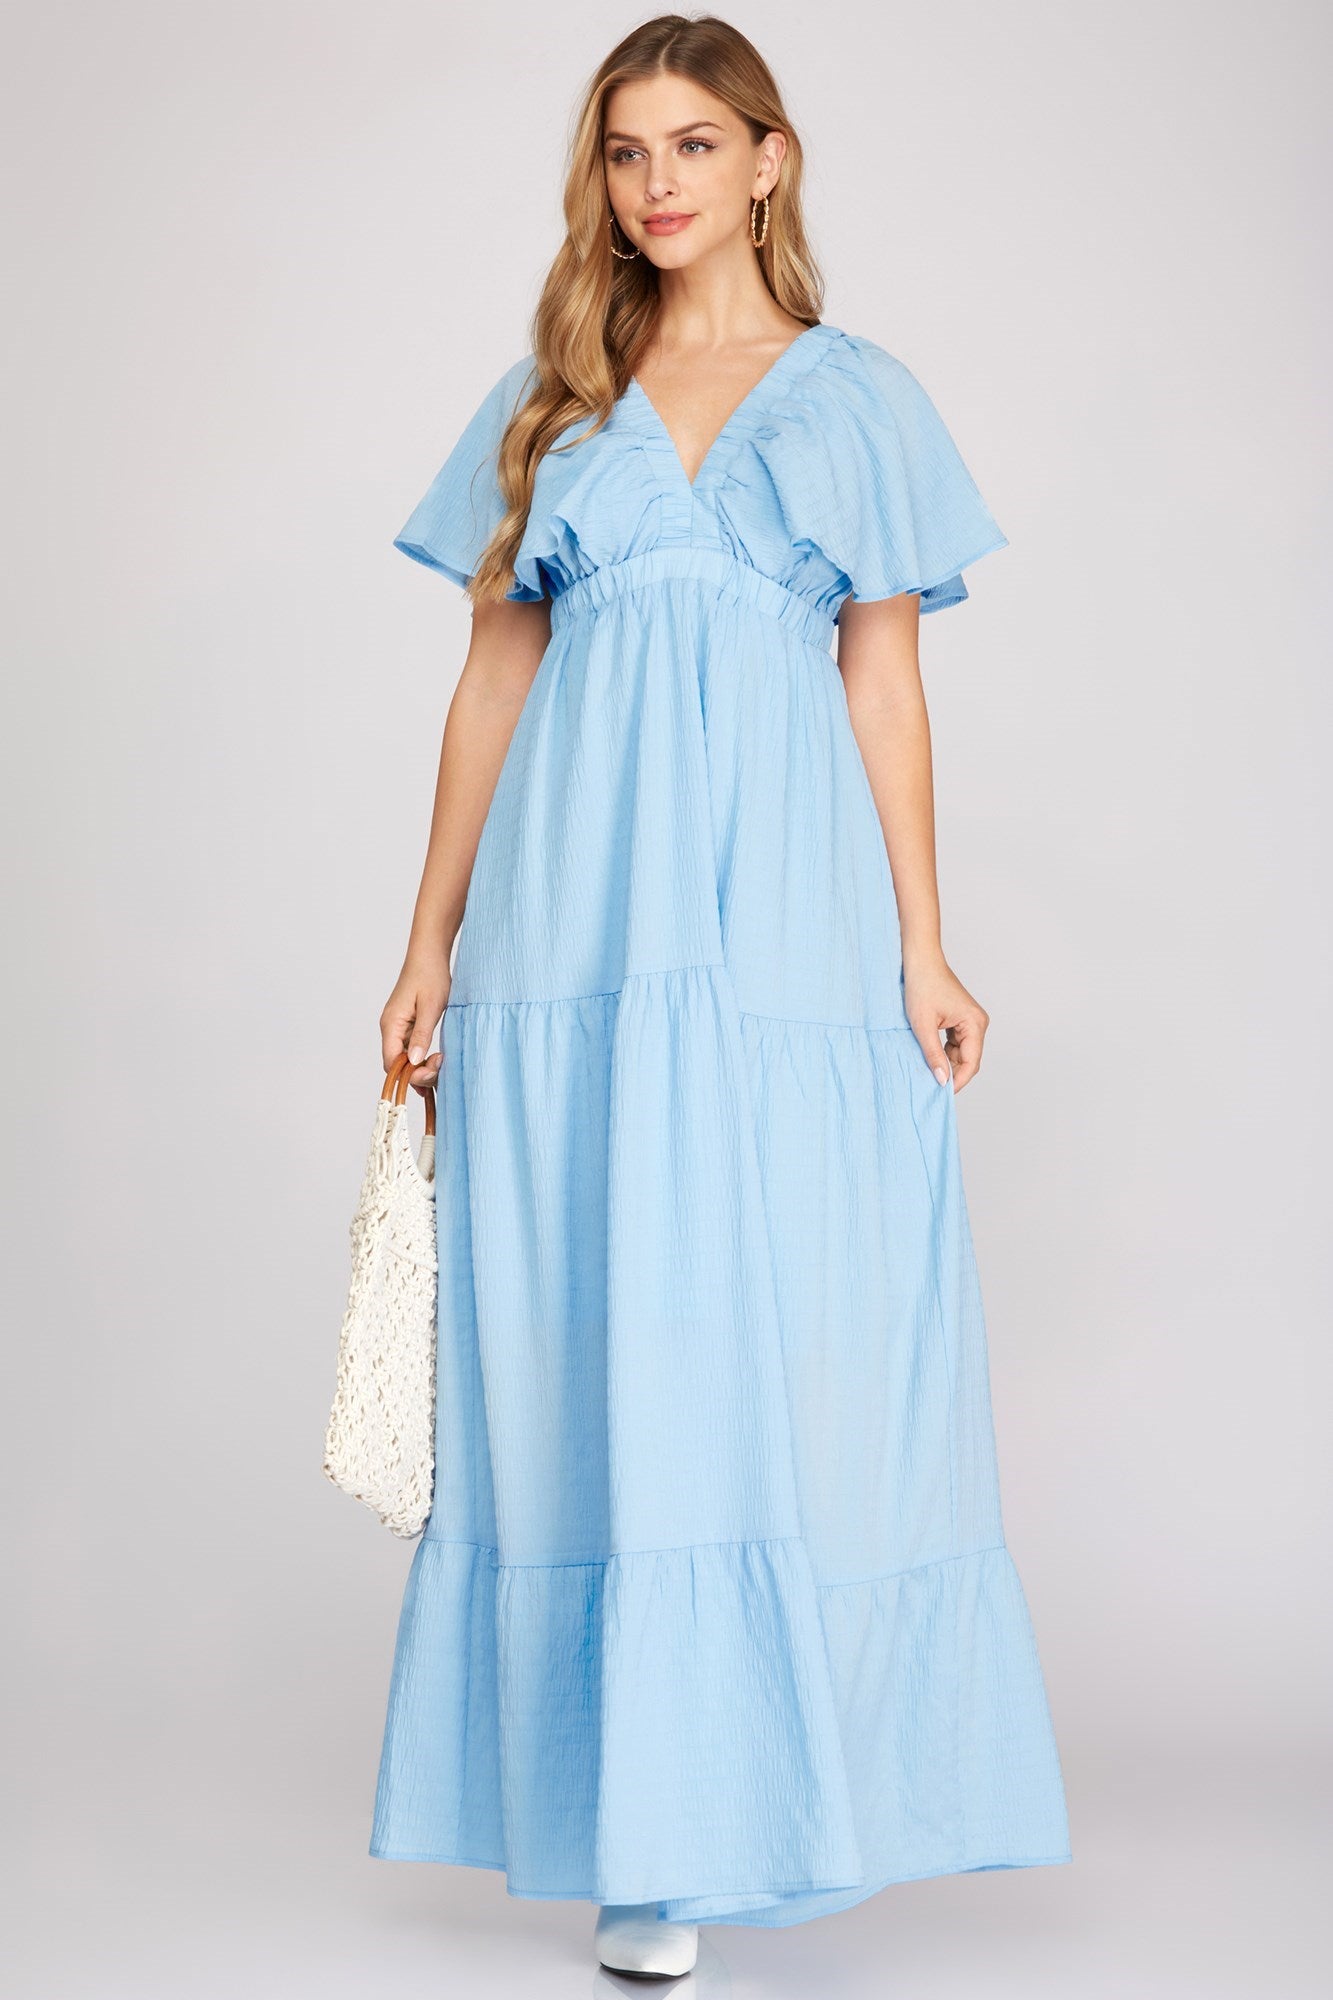 Forget me not maxi tiered dress in Light blue